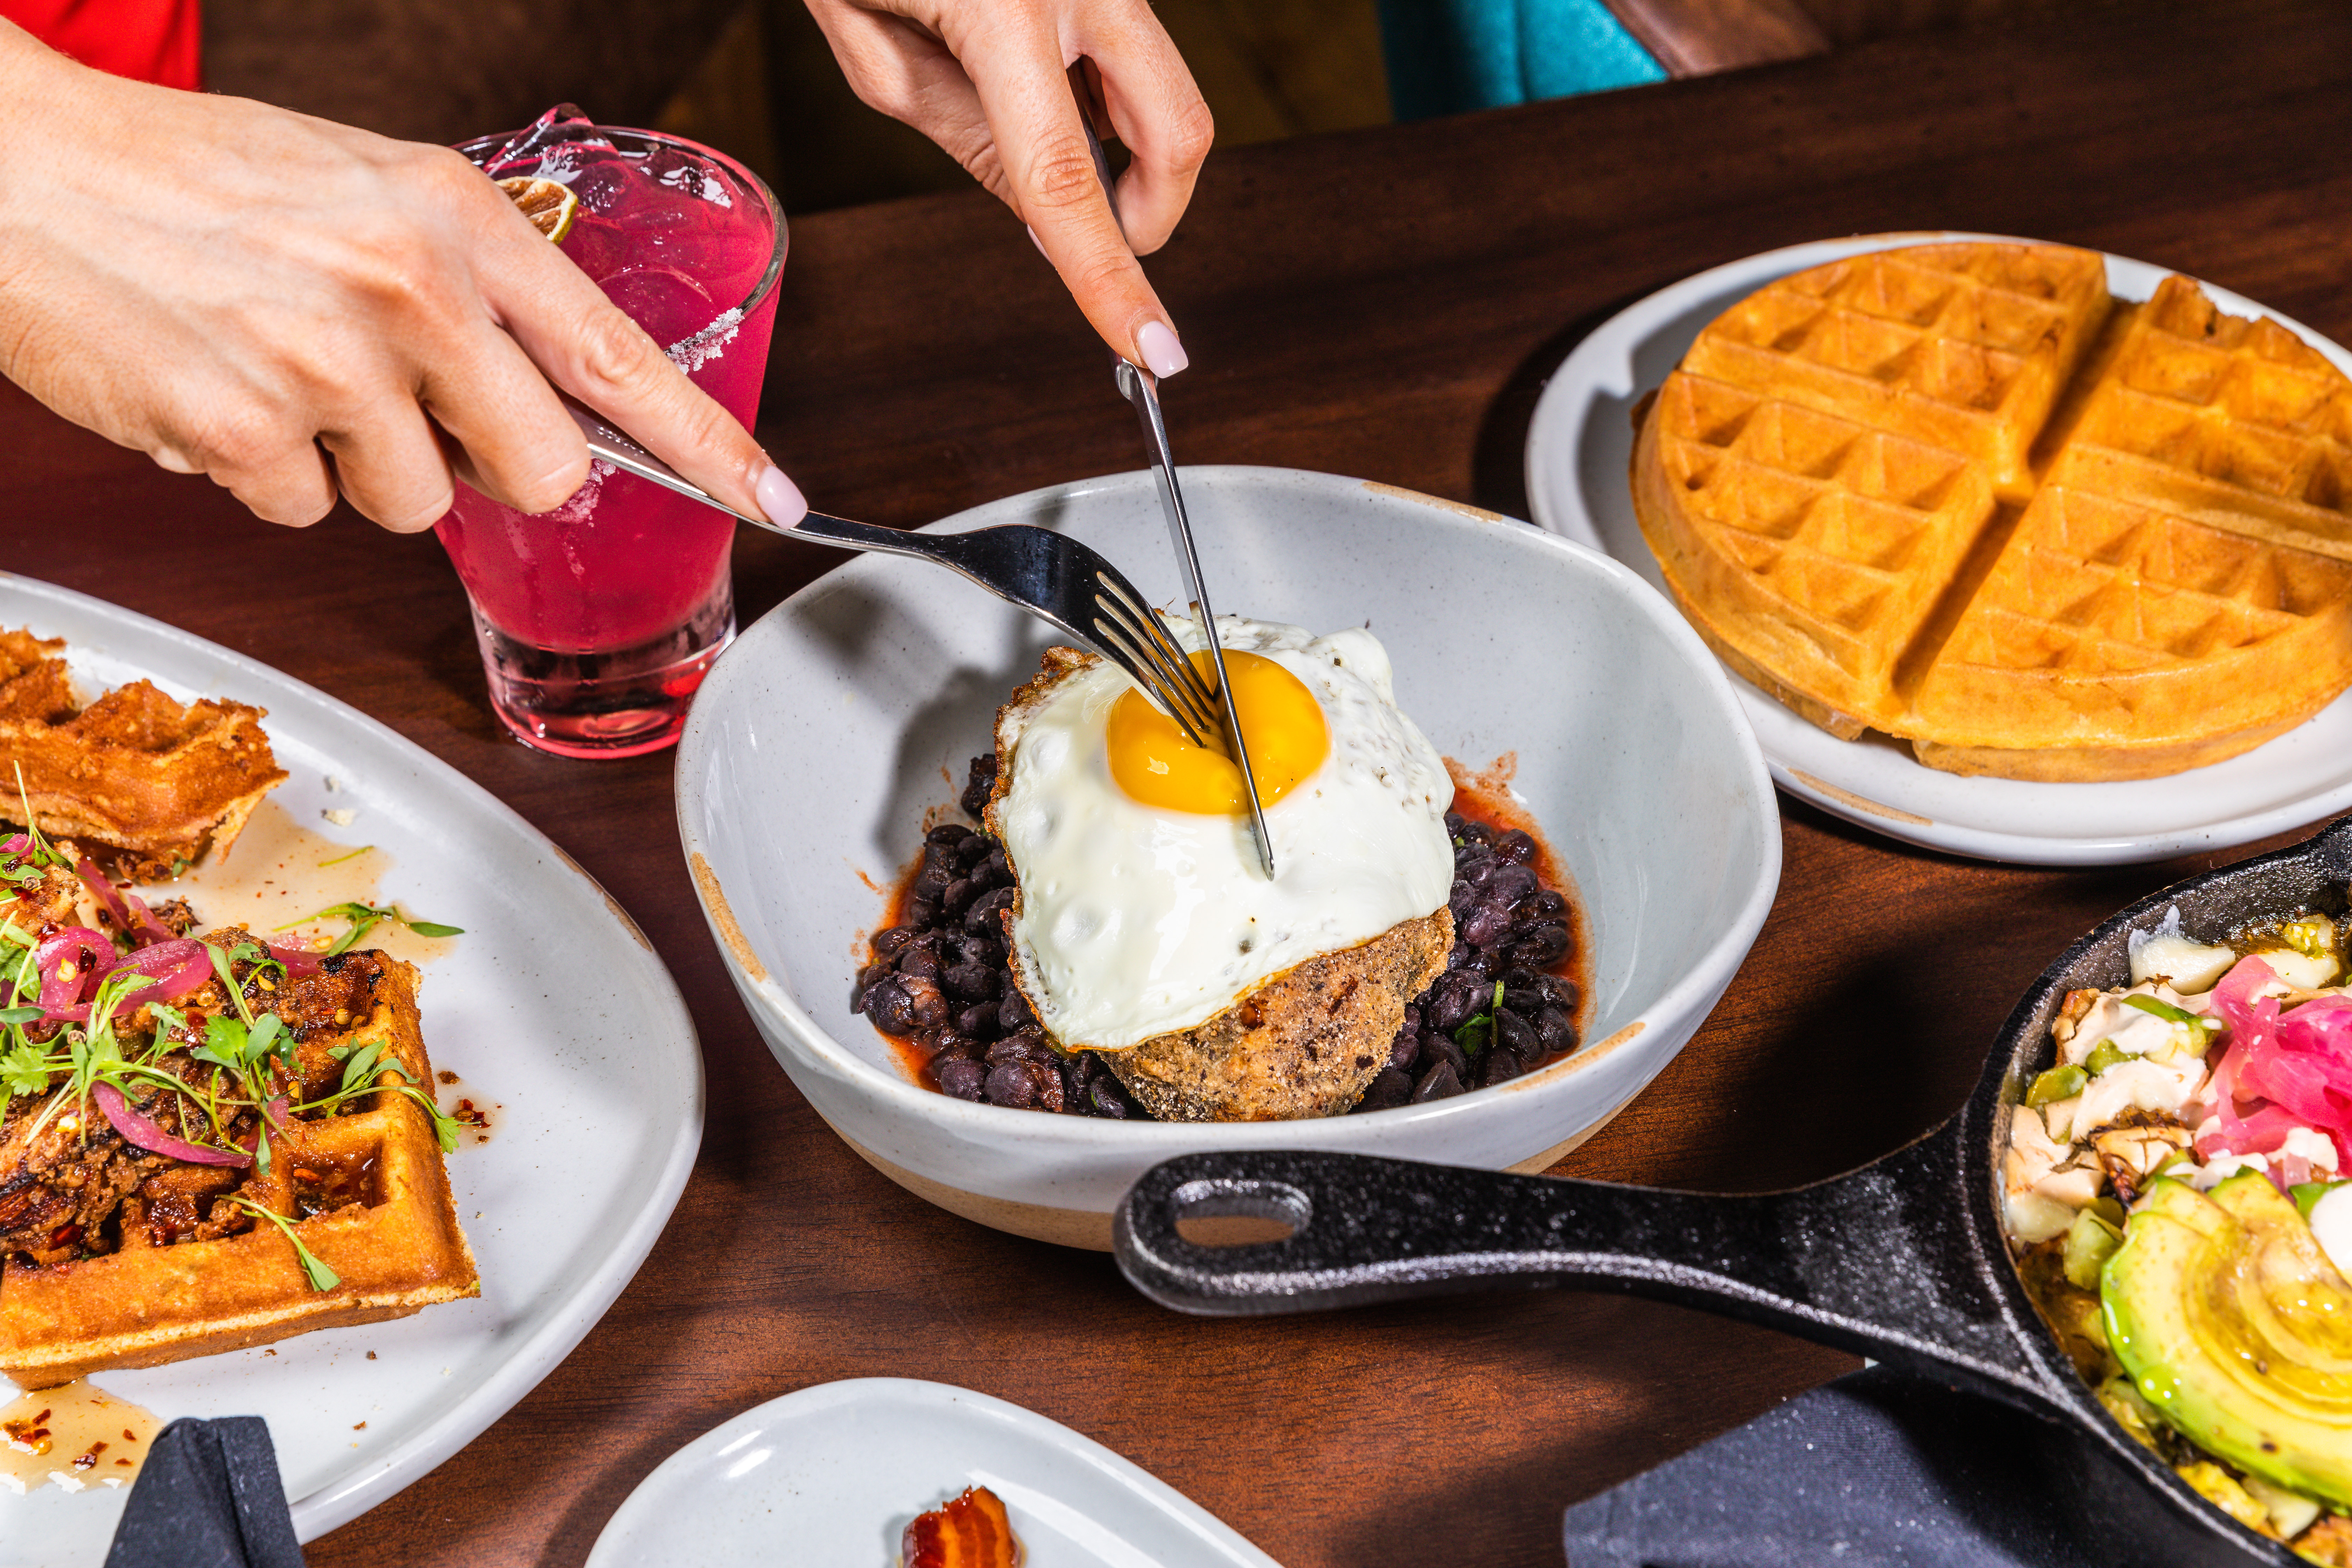 Corn_Bread_Chicken_Waffles,_The_Famous_Prickly_Pear_Margarita,_Steaks_Eggs_Entree,_Waffle,_Chilaquiles_Skillet_Canyon.jpg